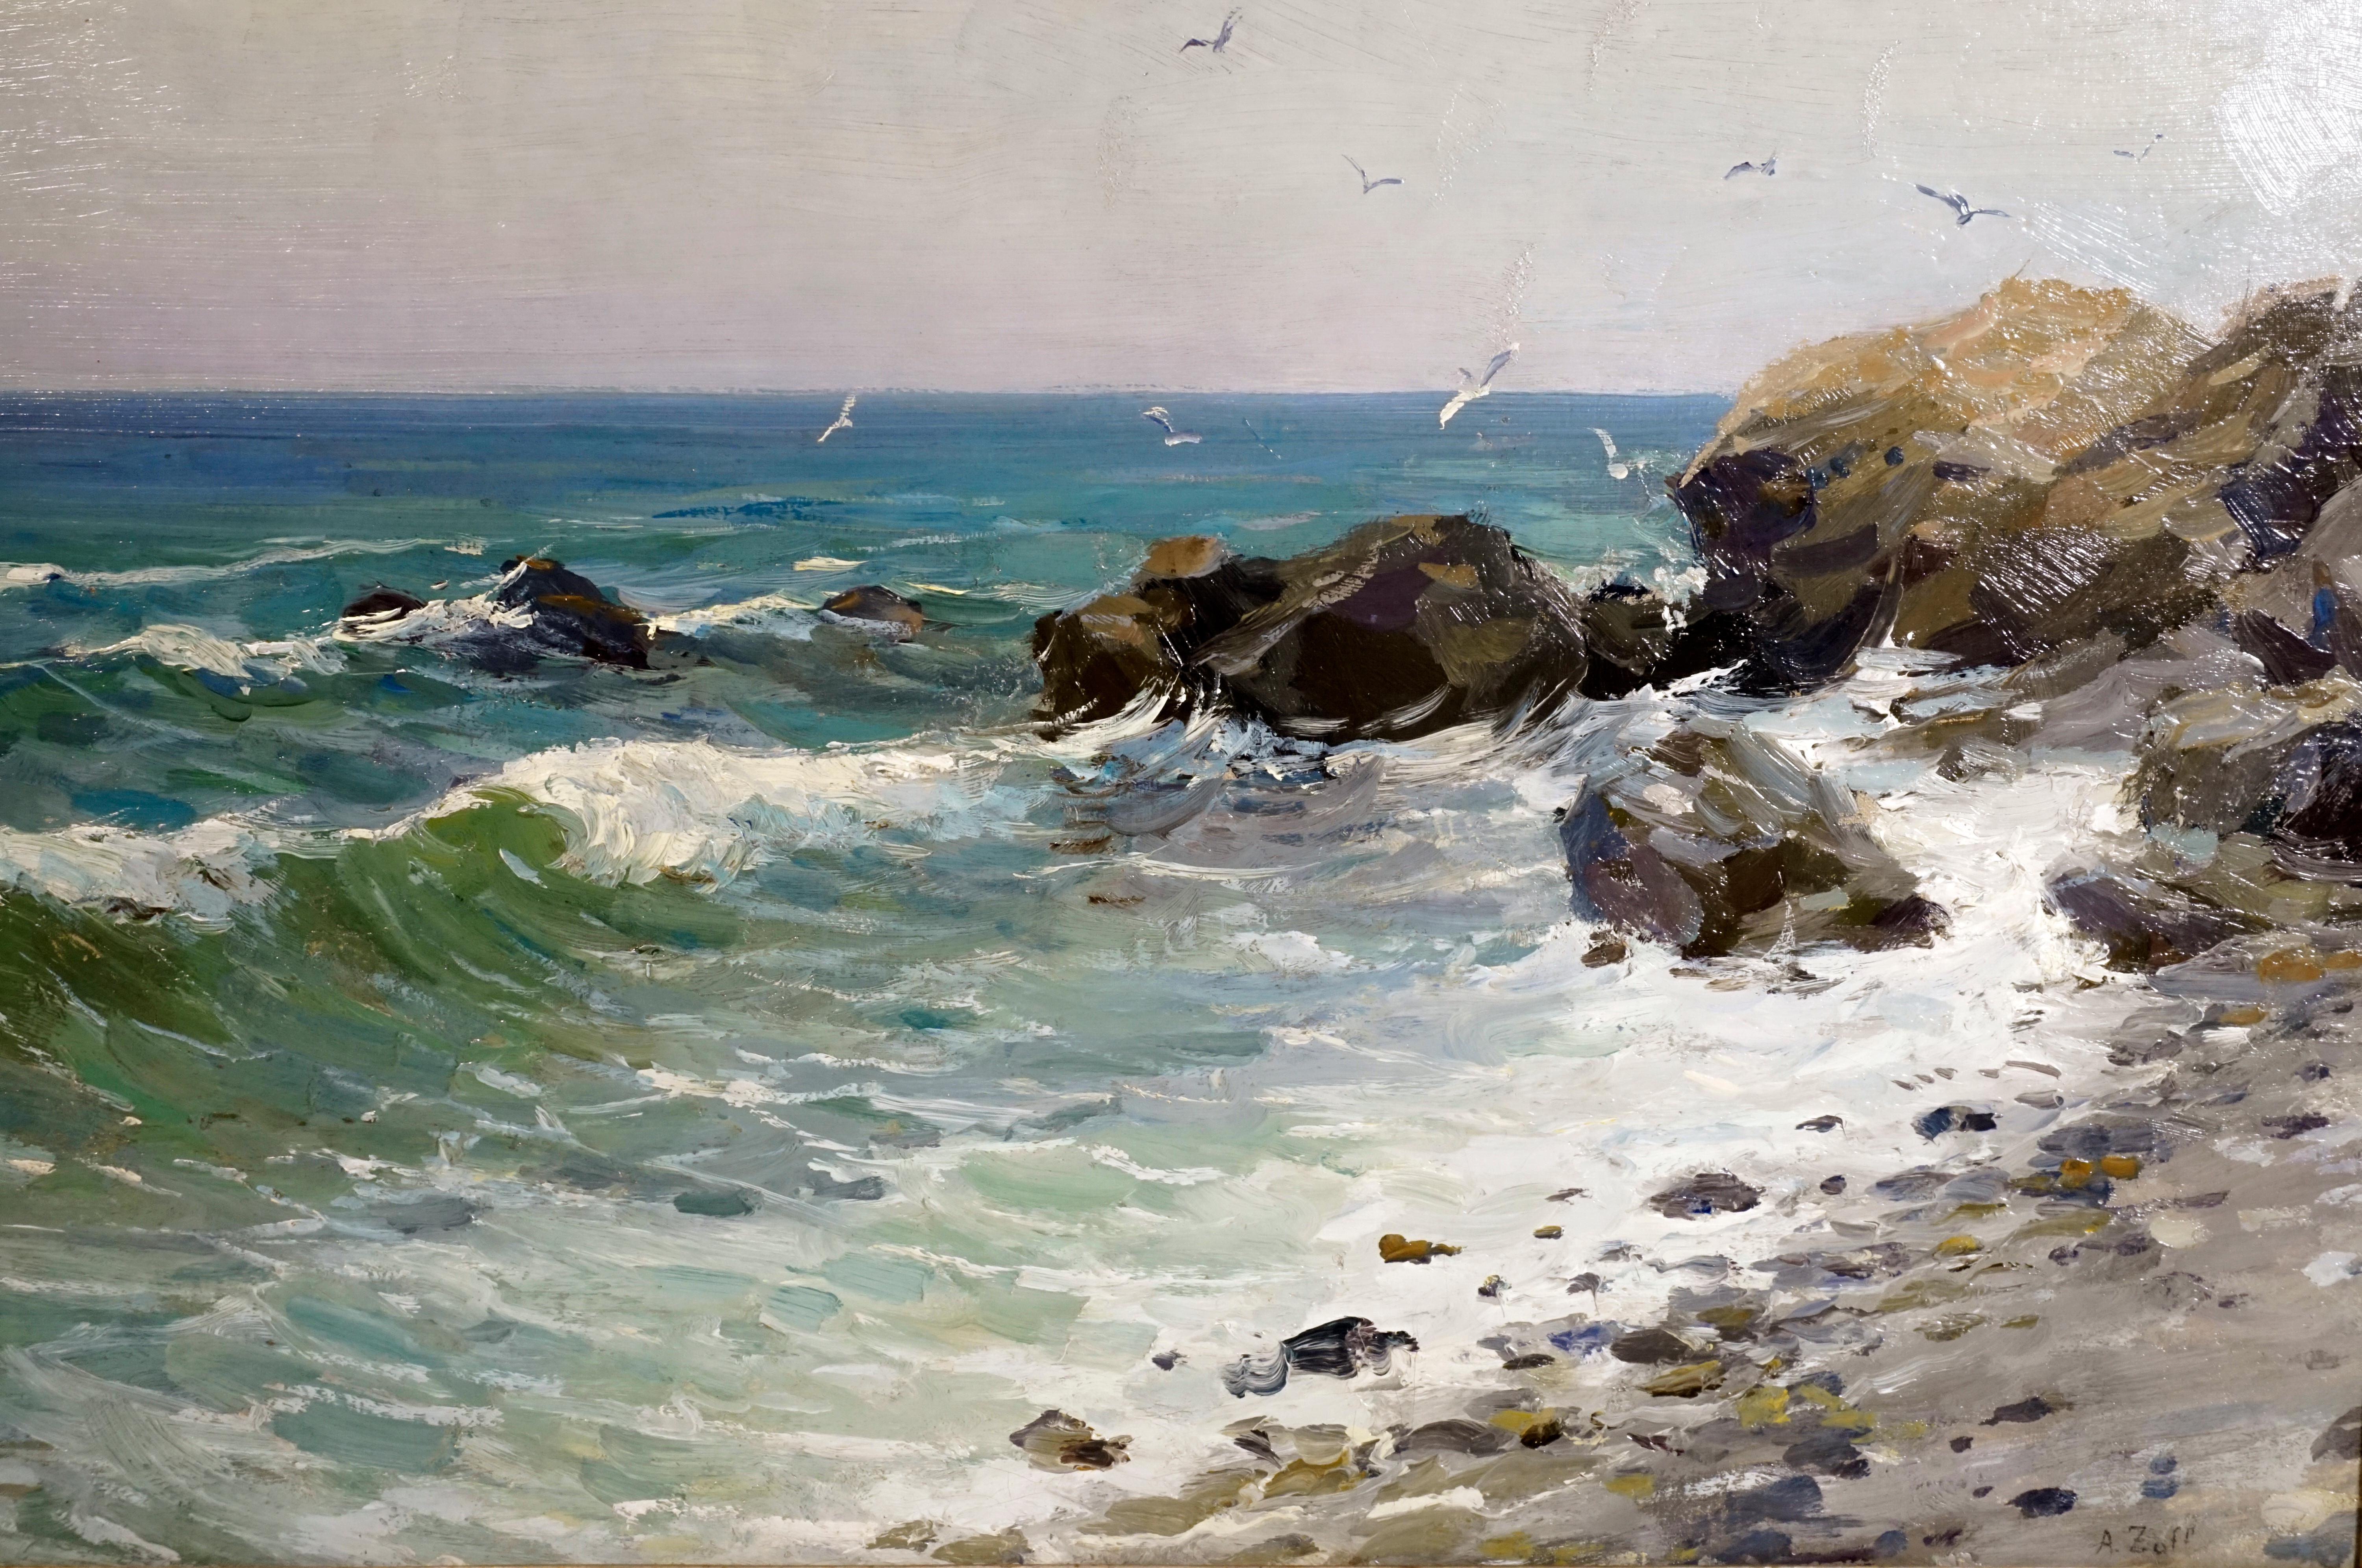 Alfred Zoff, (1852-1927)
'Coastal Landscape With Seagulls'
oil on cardboard
Measures: Painting: 38.0 x 57.0 cm / 14.96 x 22.44 in
Frame: 52.5 x 71.0 cm / 20.66 x 27.95 in

impressionist style, circa 1900

Signature: 'A. Zoff', right corner